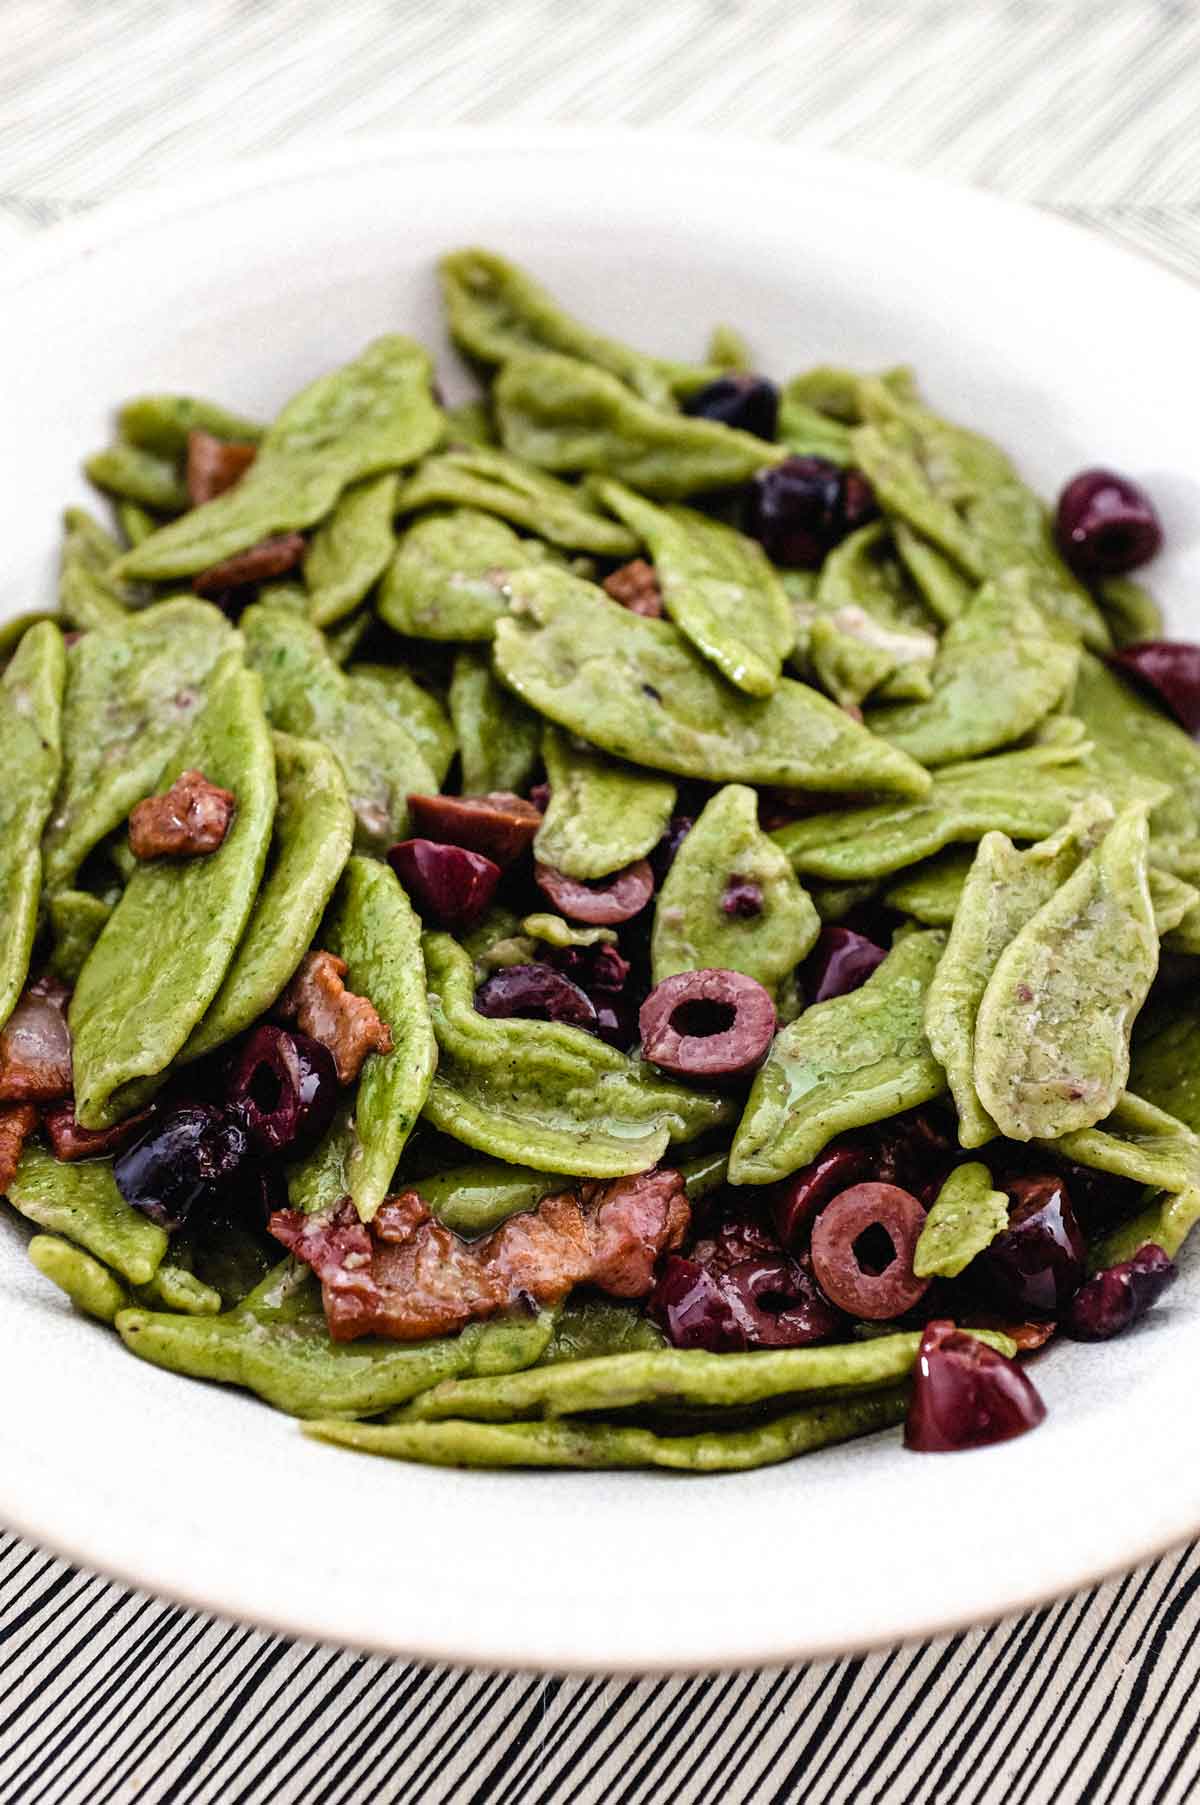 Green pasta with olives in a blue bowl on top a striped surface.